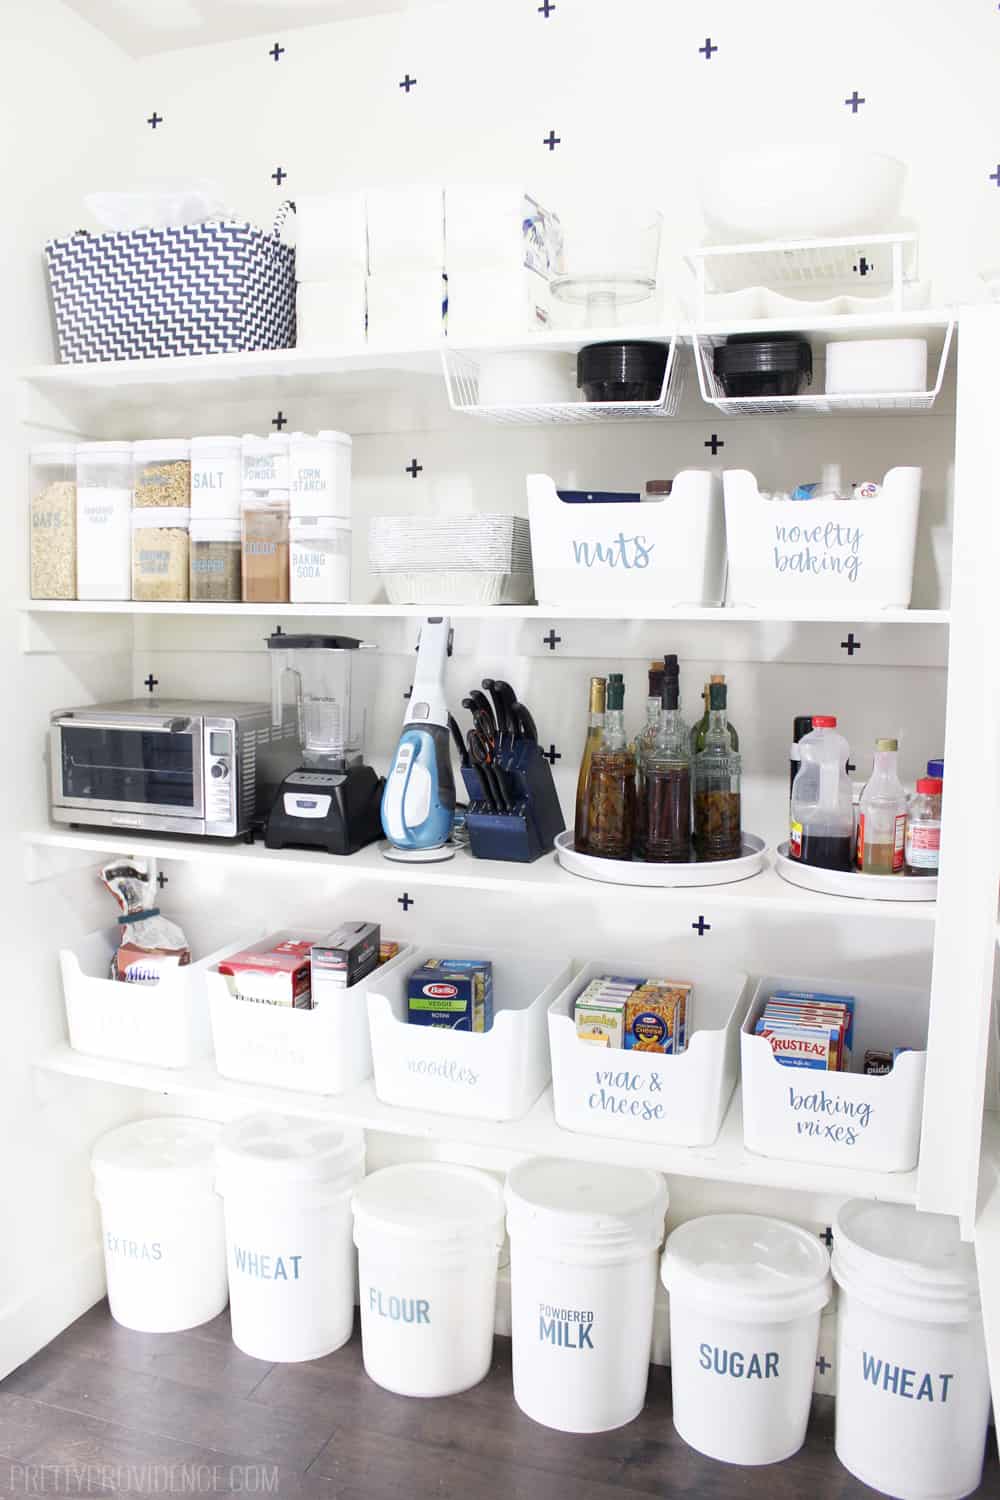 pantry organization at it's finest! great tips and tricks in this post! 